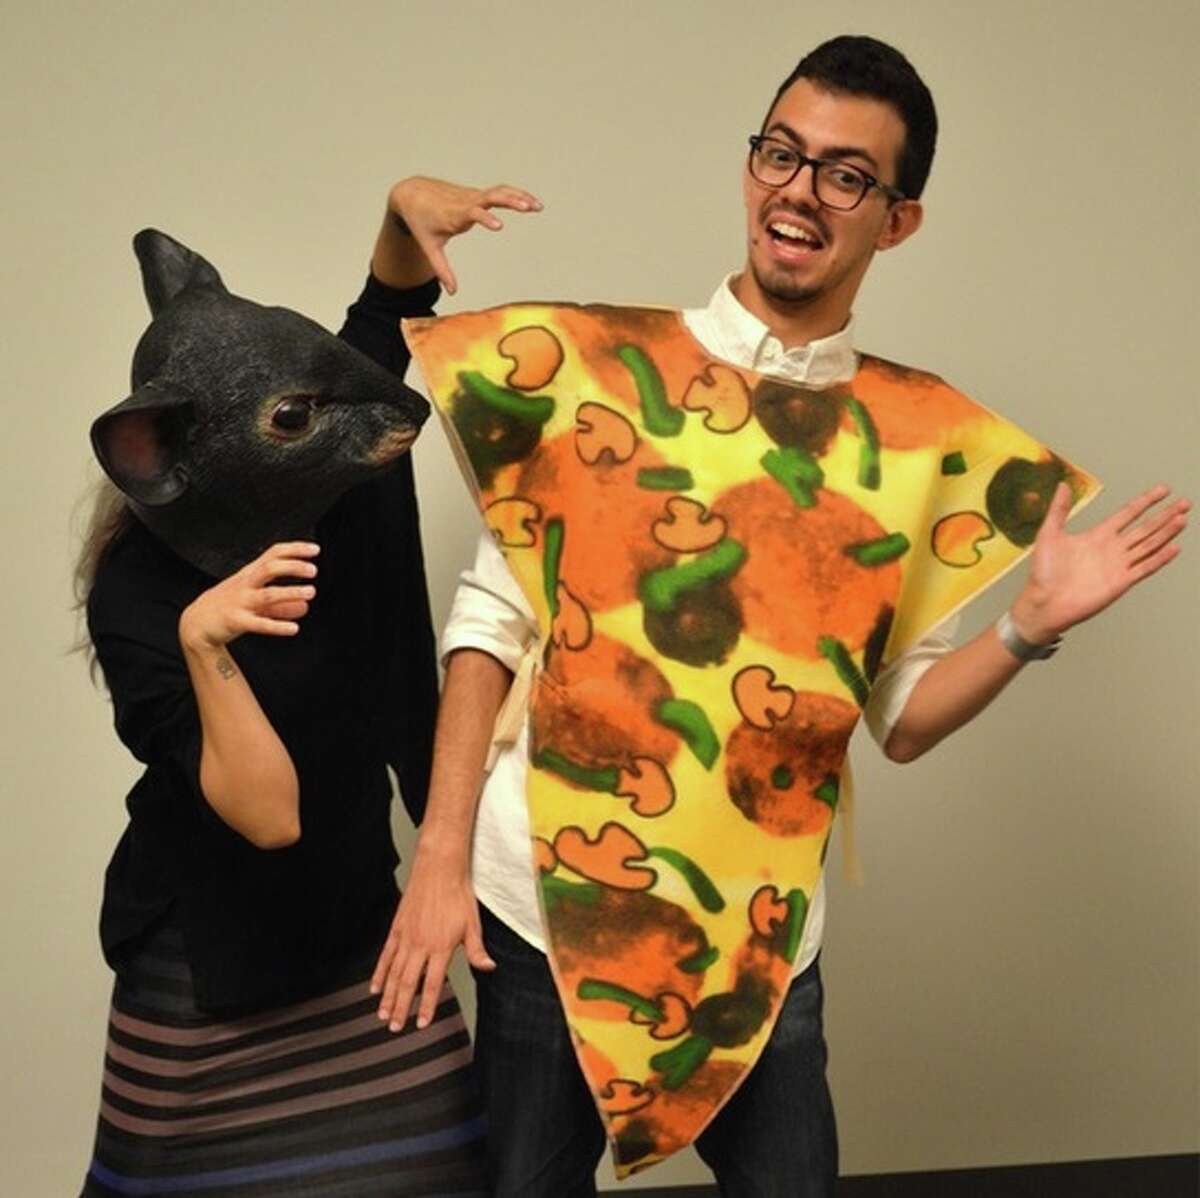 Costumes include pop-culture references, such as this Pizza Rat.